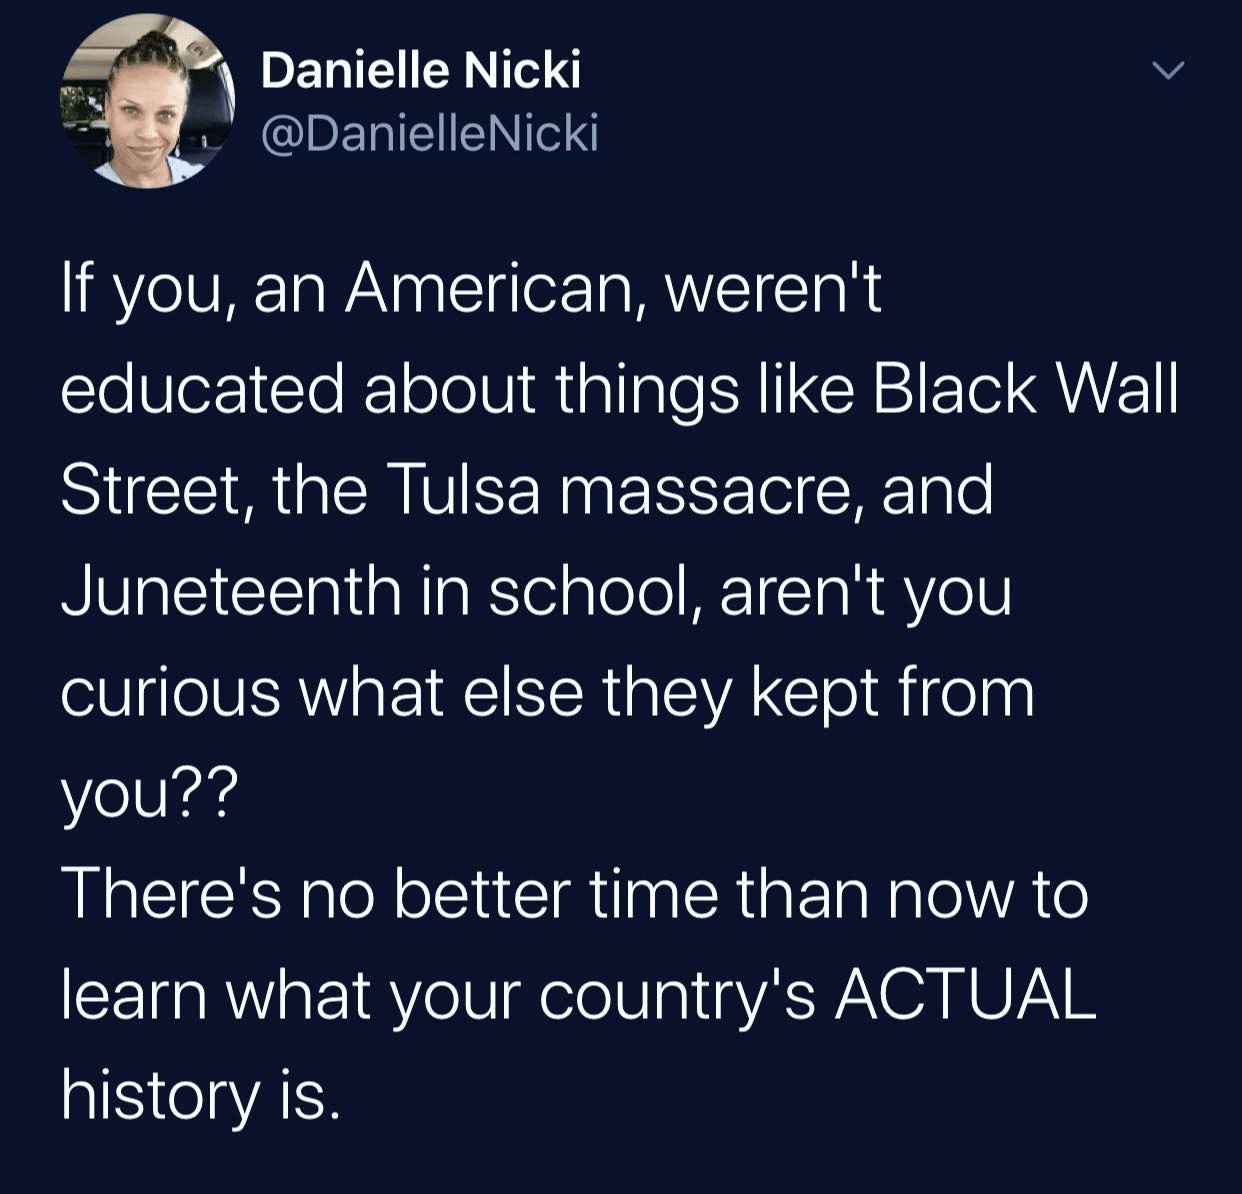 Tweets, American, WWII, Japanese Americans, Japanese, Booker Black Twitter Memes Tweets, American, WWII, Japanese Americans, Japanese, Booker text: Danielle Nicki @DanielleNicki If you, an American, weren't educated about things like Black Wall Street, the Tulsa massacre, and Juneteenth in school, aren't you curious what else they kept from There's no better time than now to learn what your country's ACTUAL history is. 